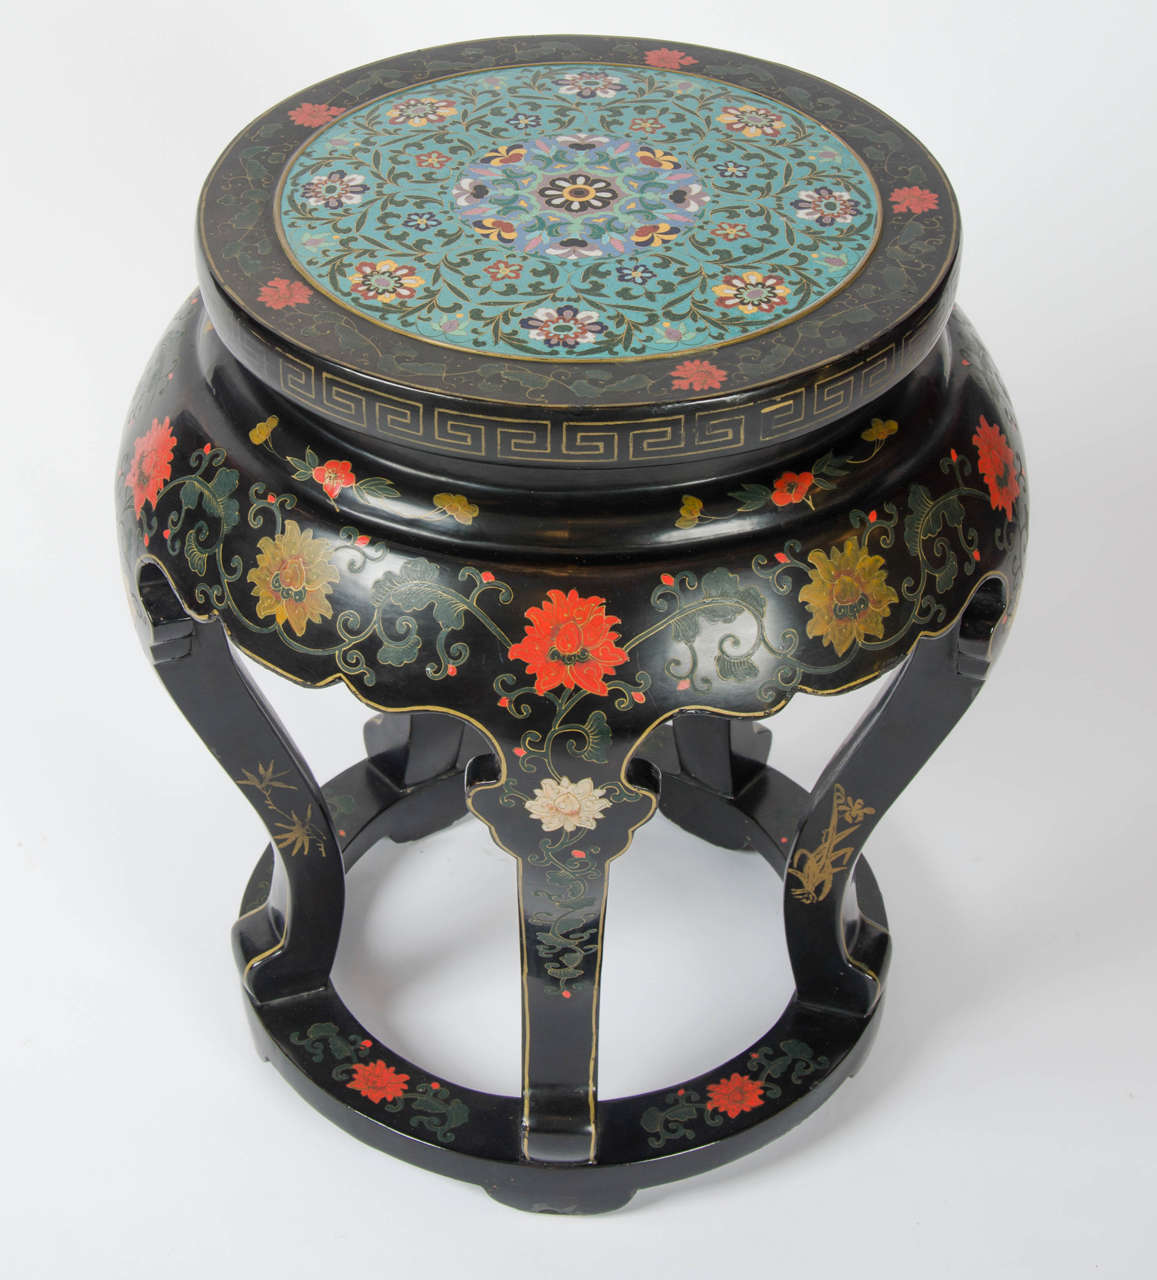 20th century Chinese Black Lacquered Side Table with Cloisonné Top (Chinoiserie)